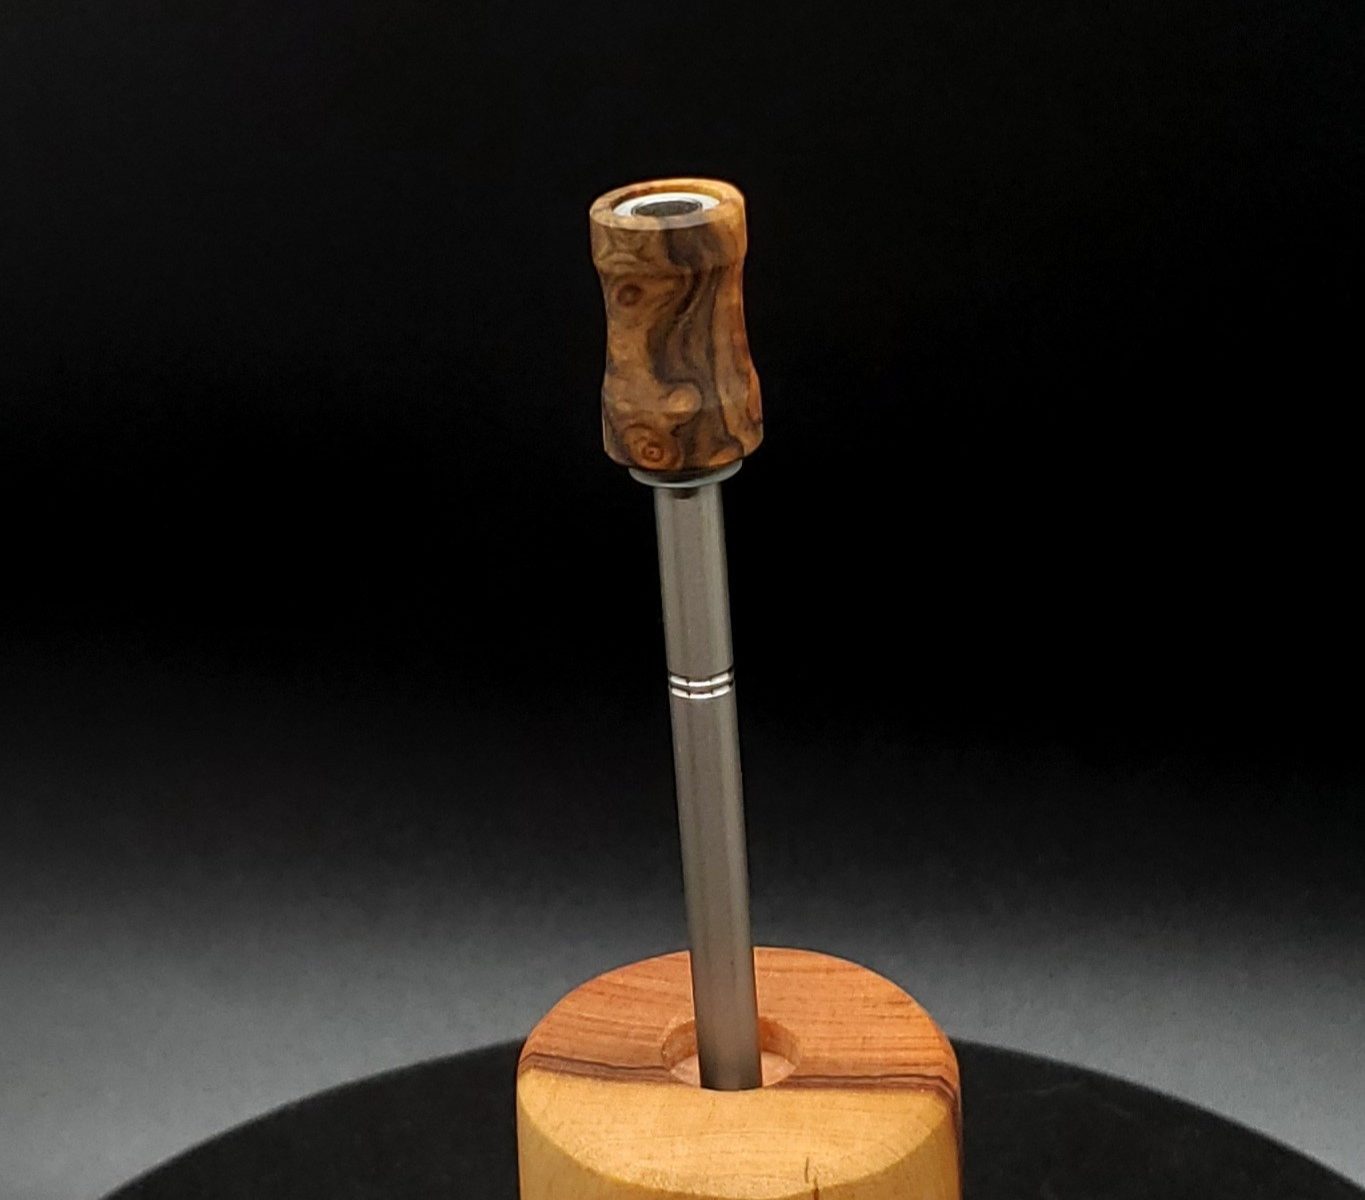 This image portrays Dynavap Spinning Mouthpiece-Graybox Burl by Dovetail Woodwork.